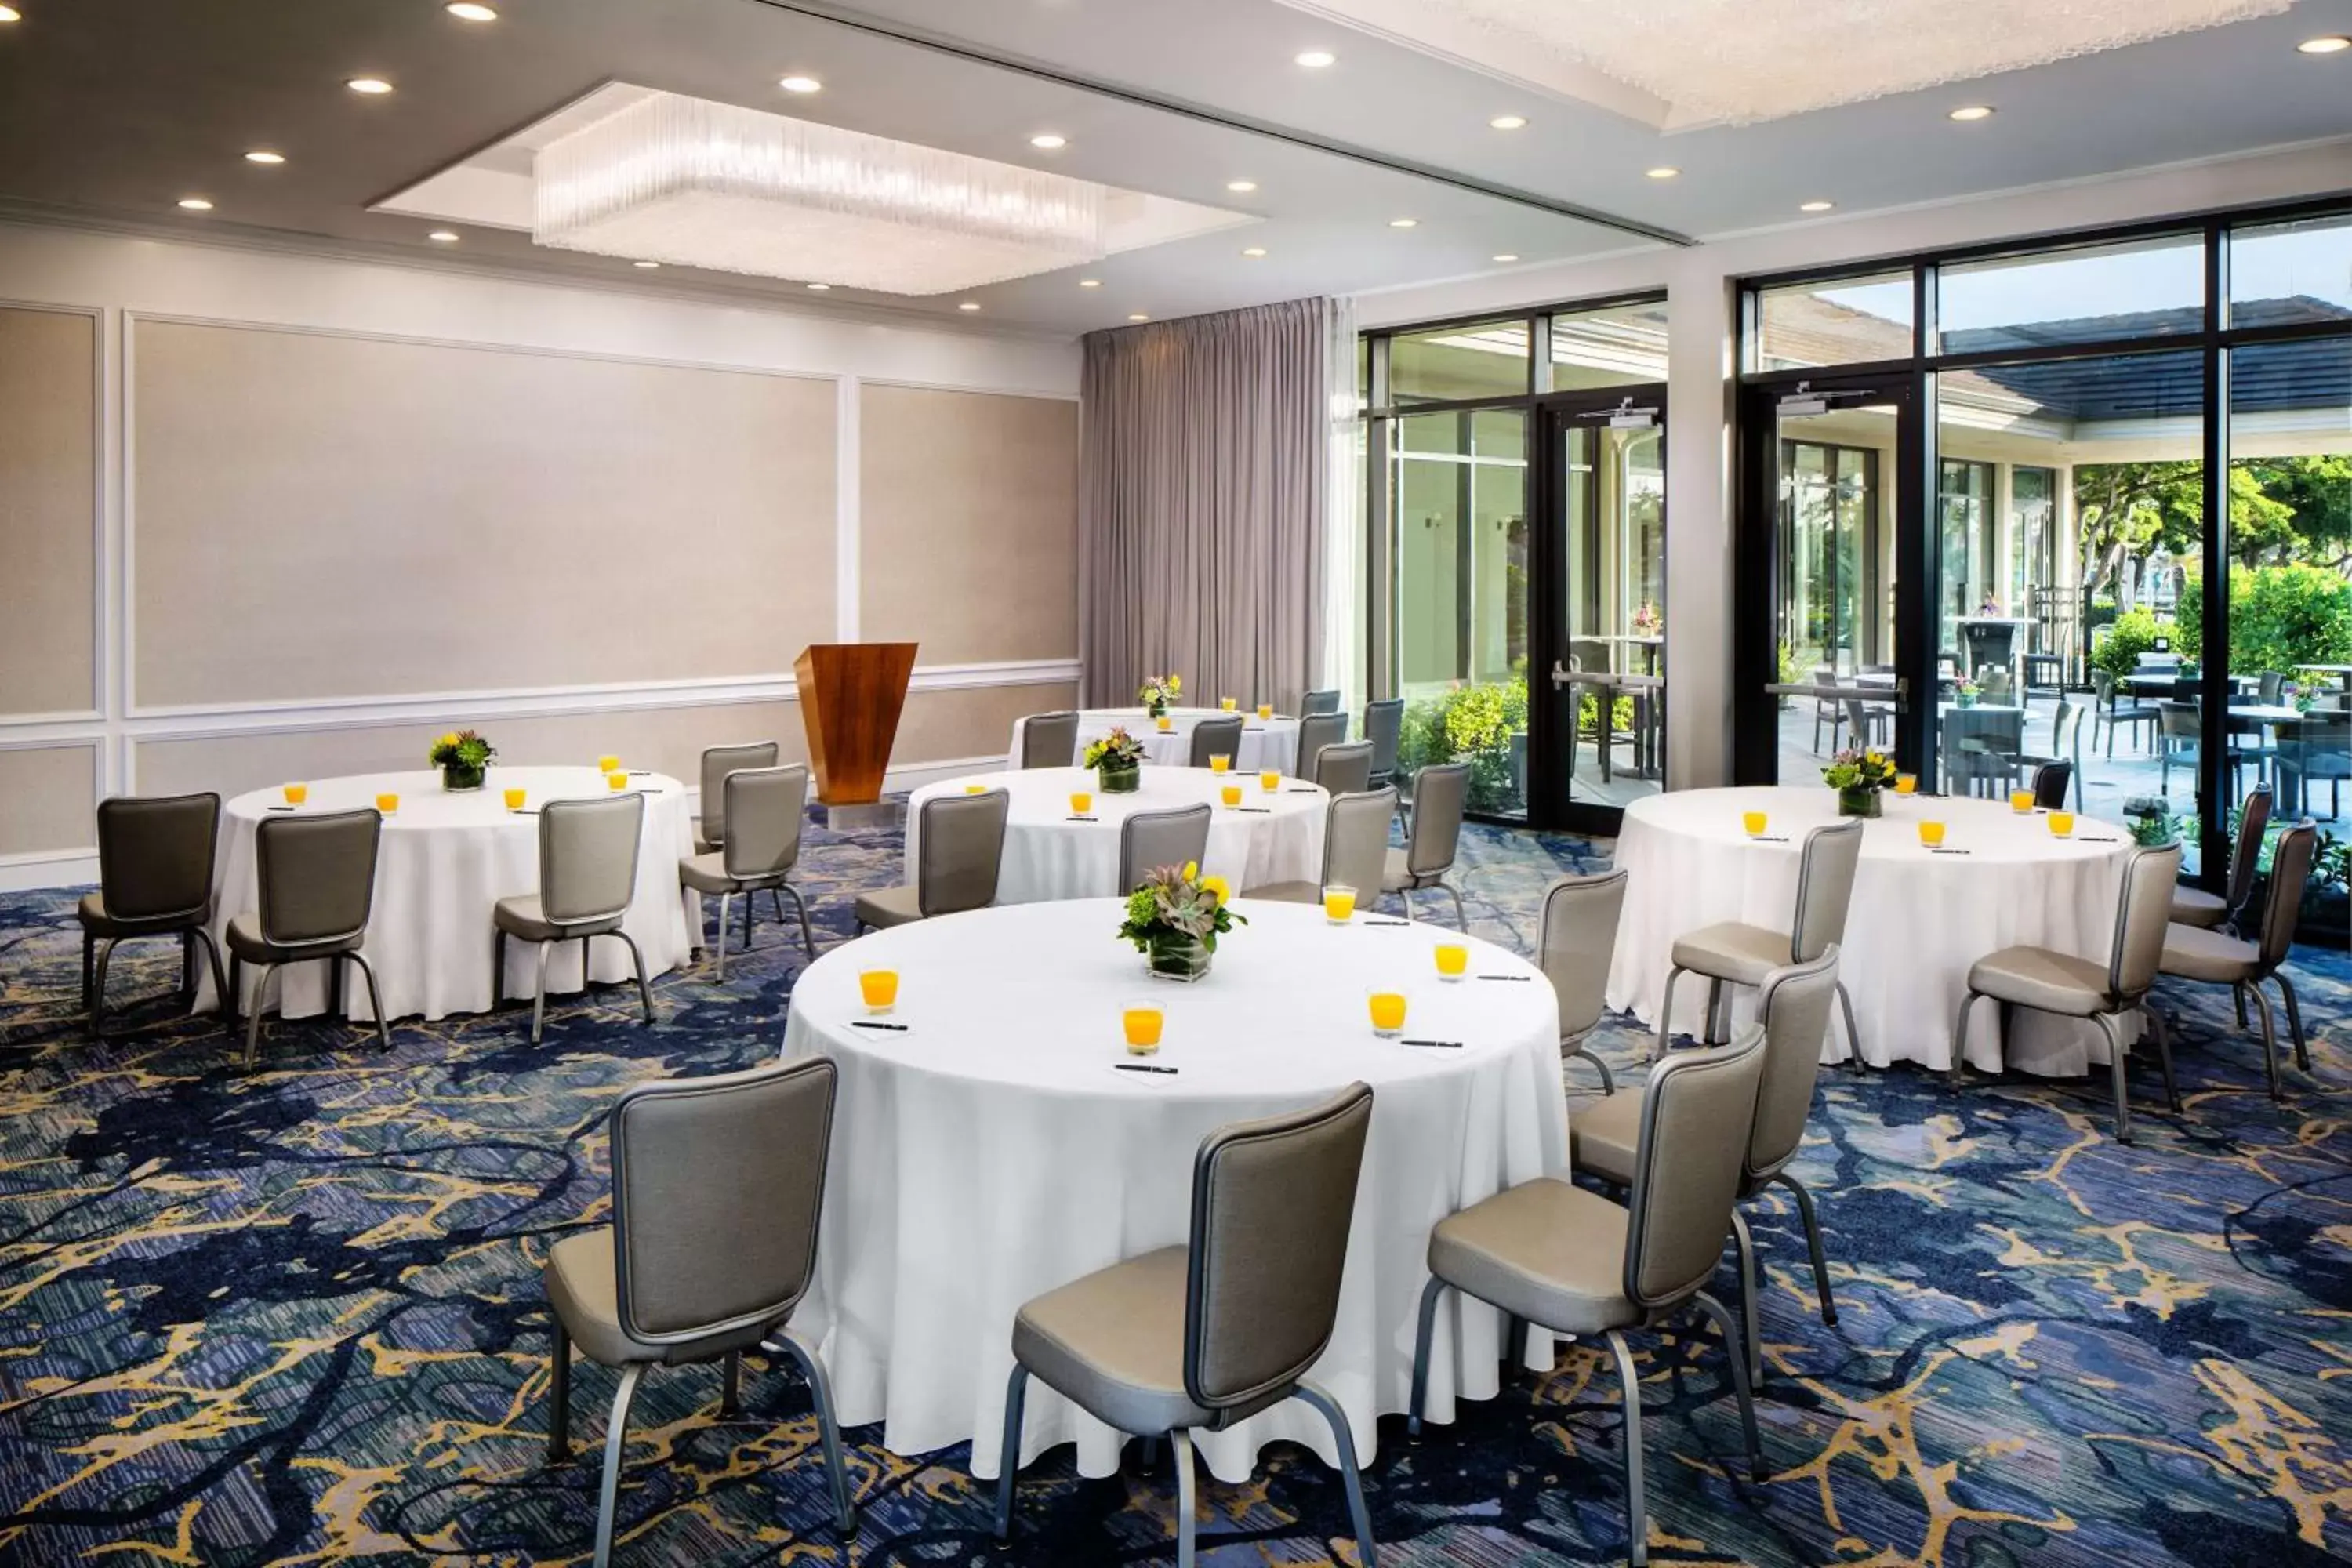 Meeting/conference room, Banquet Facilities in Hilton Marco Island Beach Resort and Spa